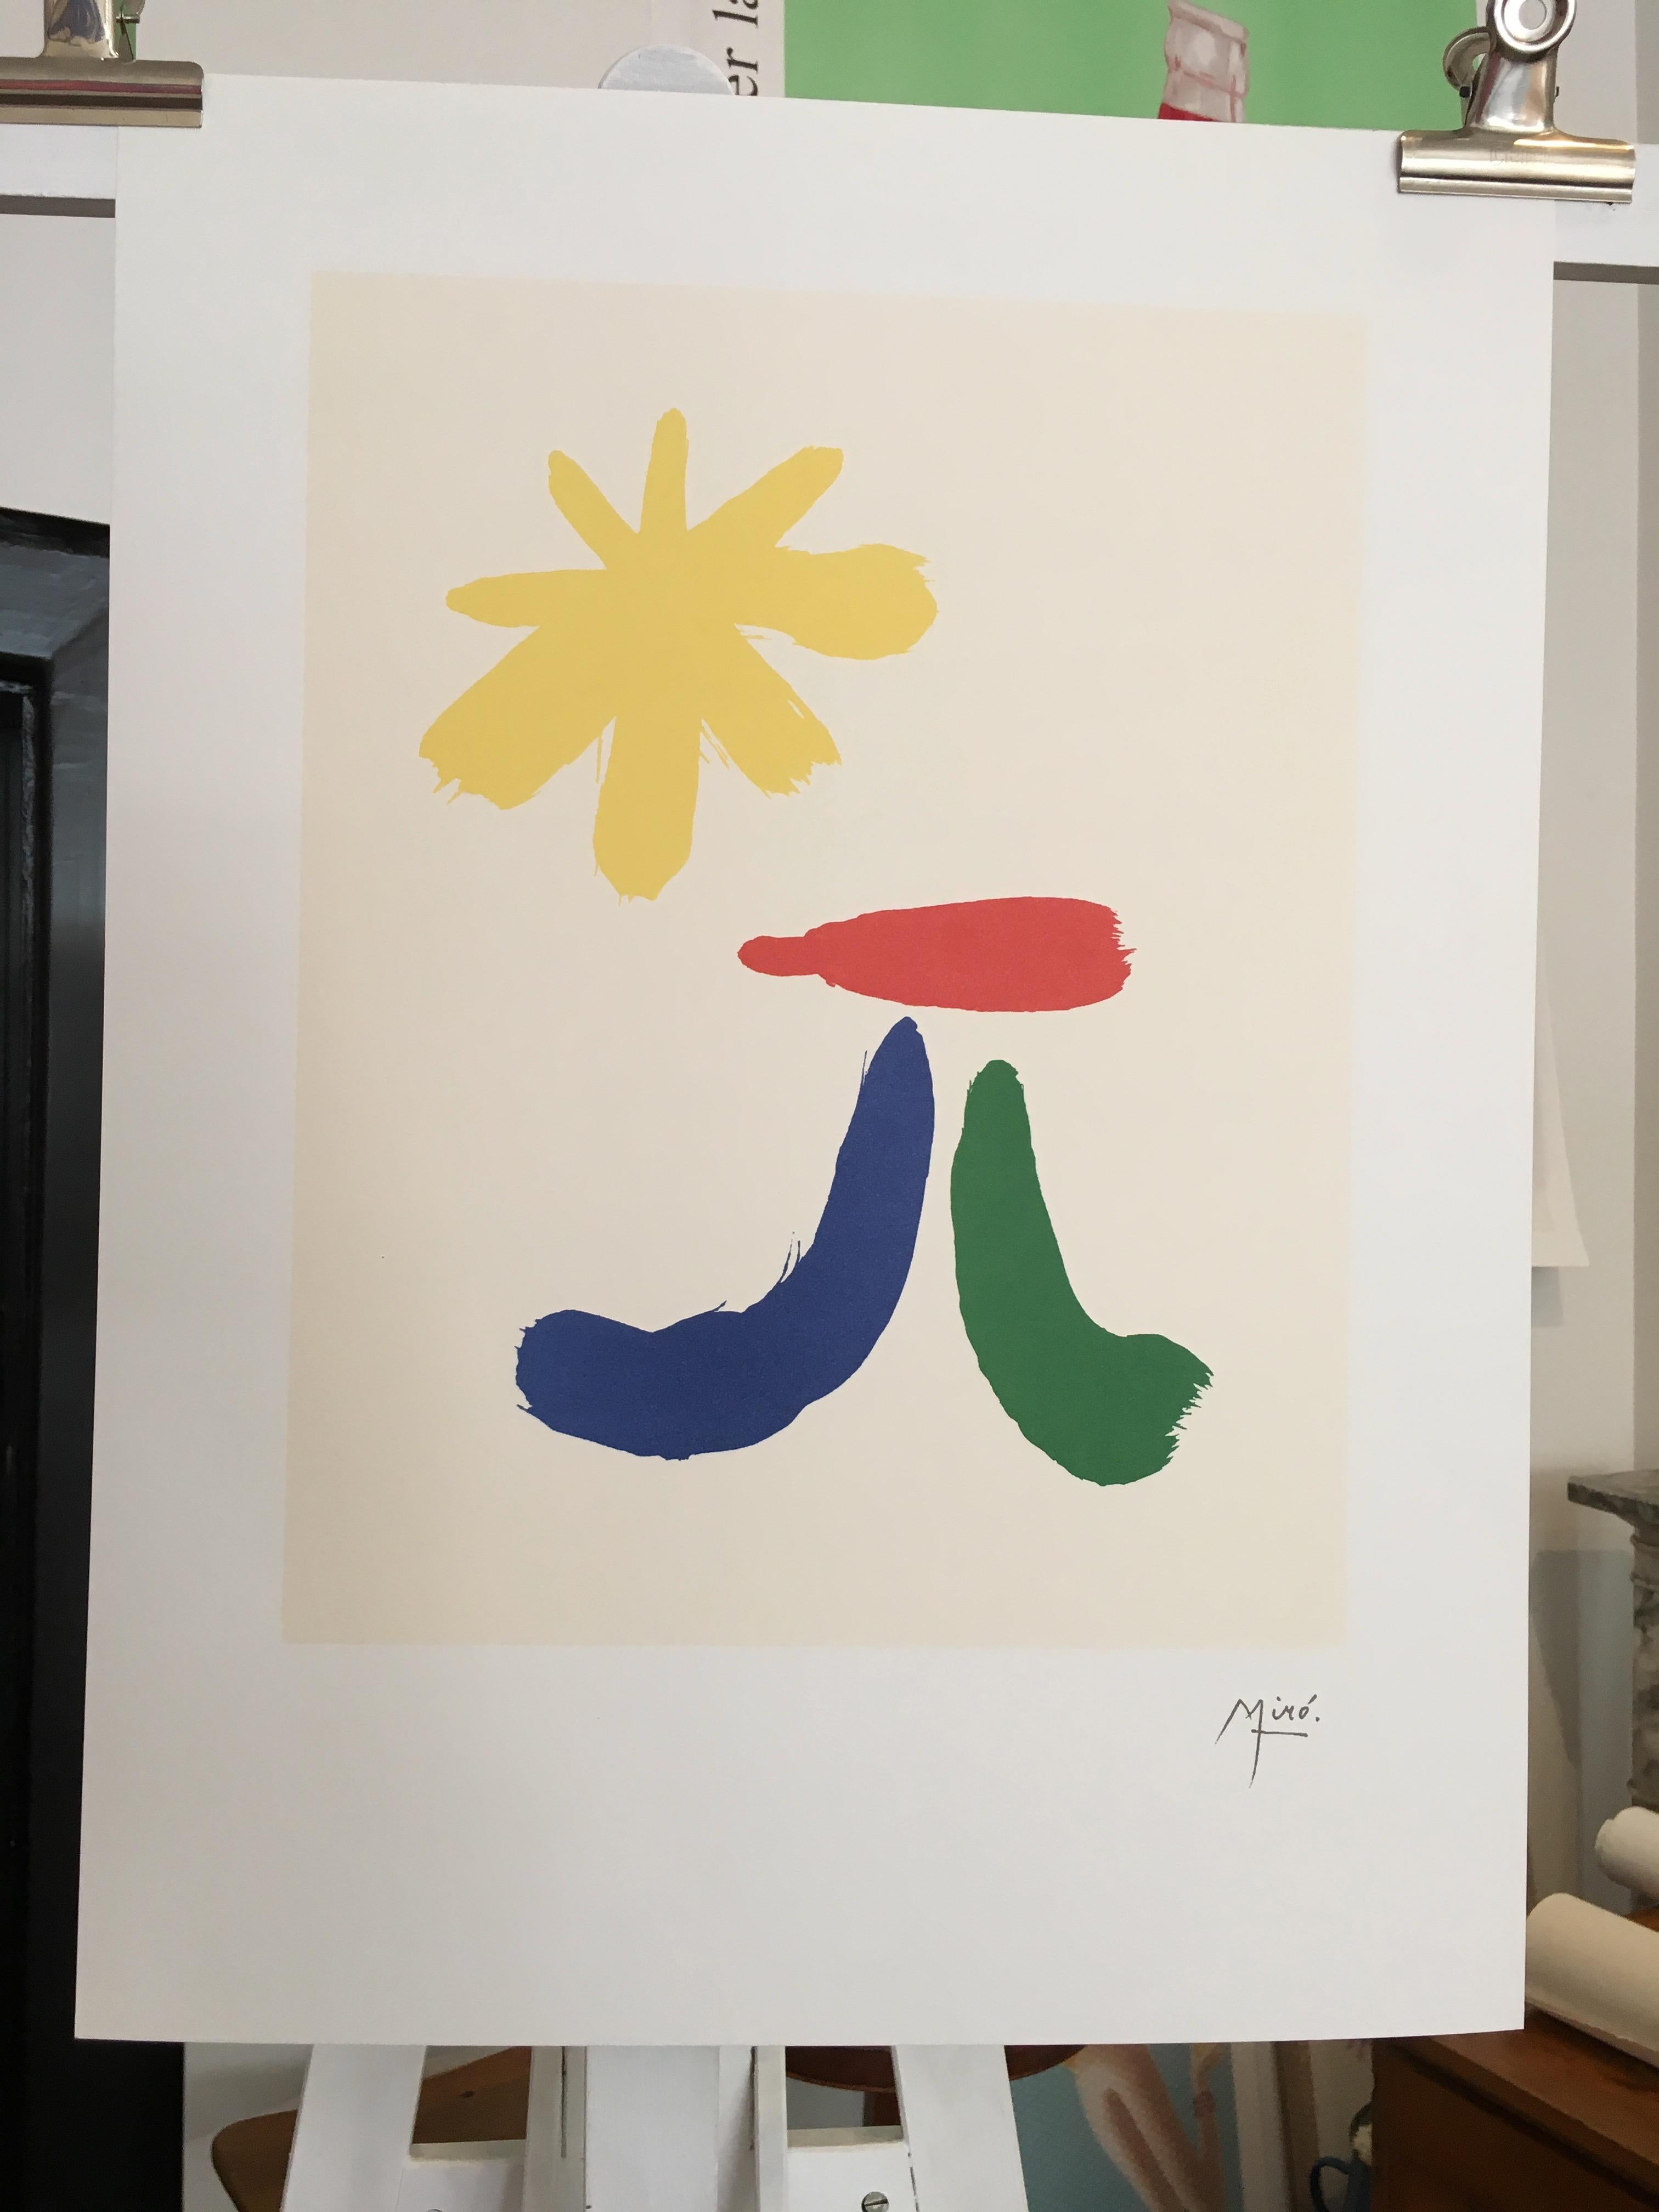 Vintage art poster Miro 'Parler seul' Maeght Editeur 

This is an edition poster which was beautifully reproduced by Maeght Editeur. 'Parler seul' translates to 'speaking alone' 

This poster in un-linen backed as it has been printed onto thick